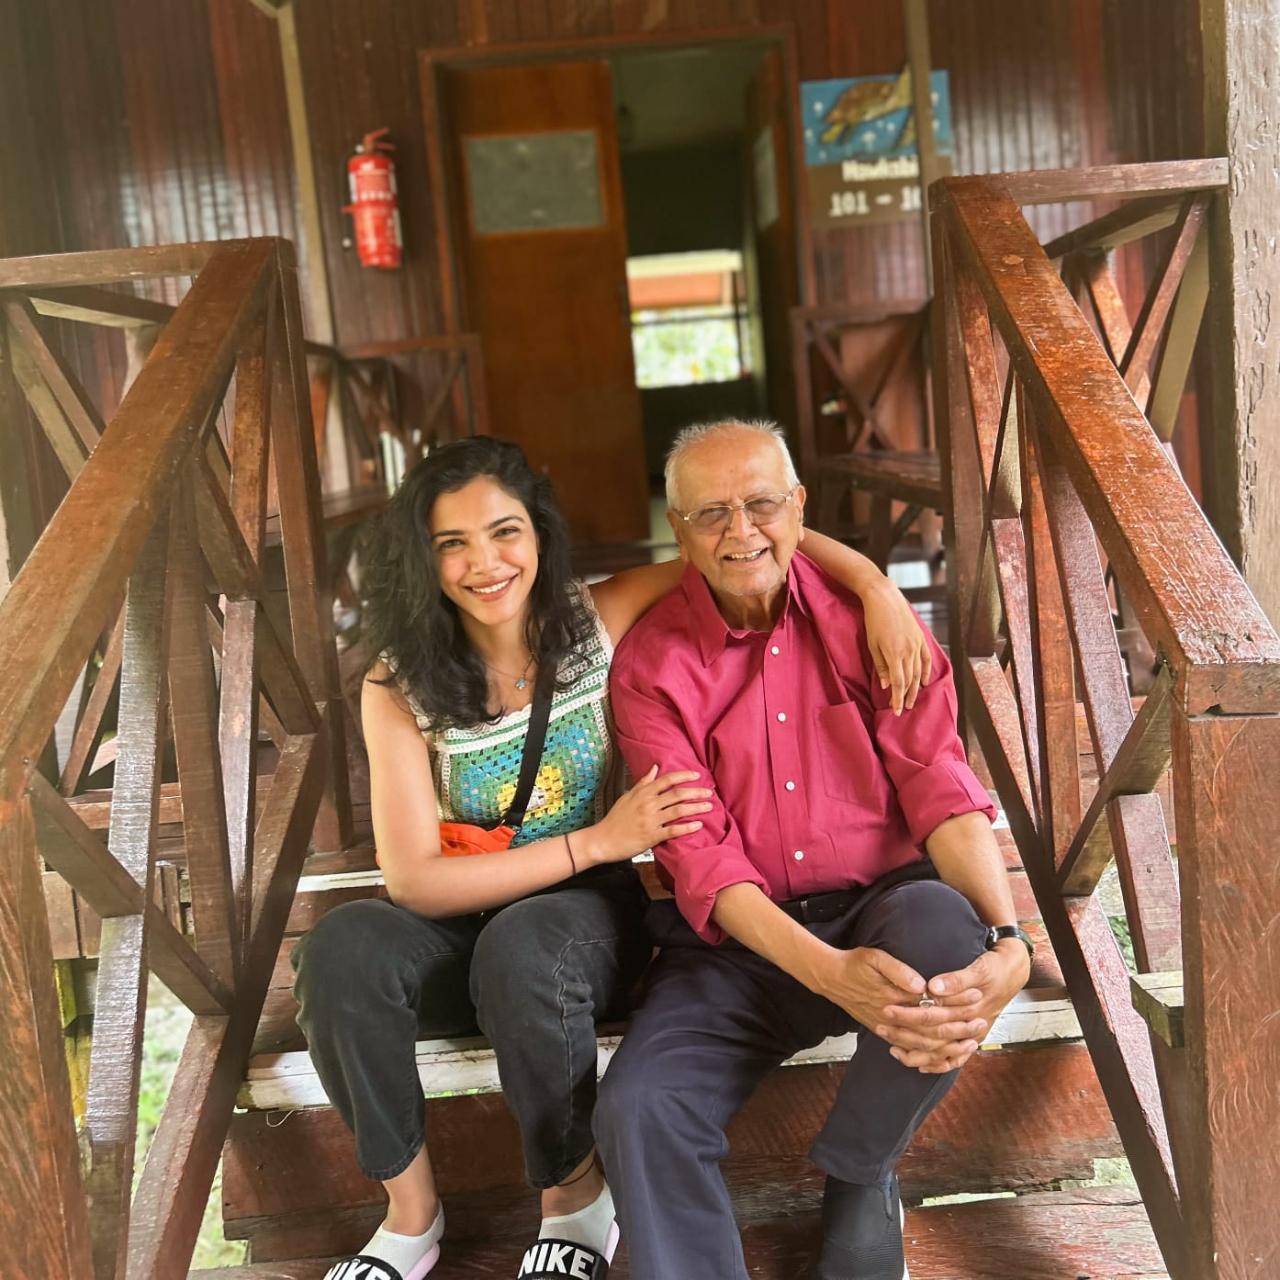 Shriya and her mom surprised her 'ajoba' in the middle of a rainforest and are now exploring the picturesque Kinabtangan Rainforest in Sandakan . On the work front, Shriya has some exciting films lined up and will also start the shoot for season 2 for 'The Broken News' and 'Guilty Minds'